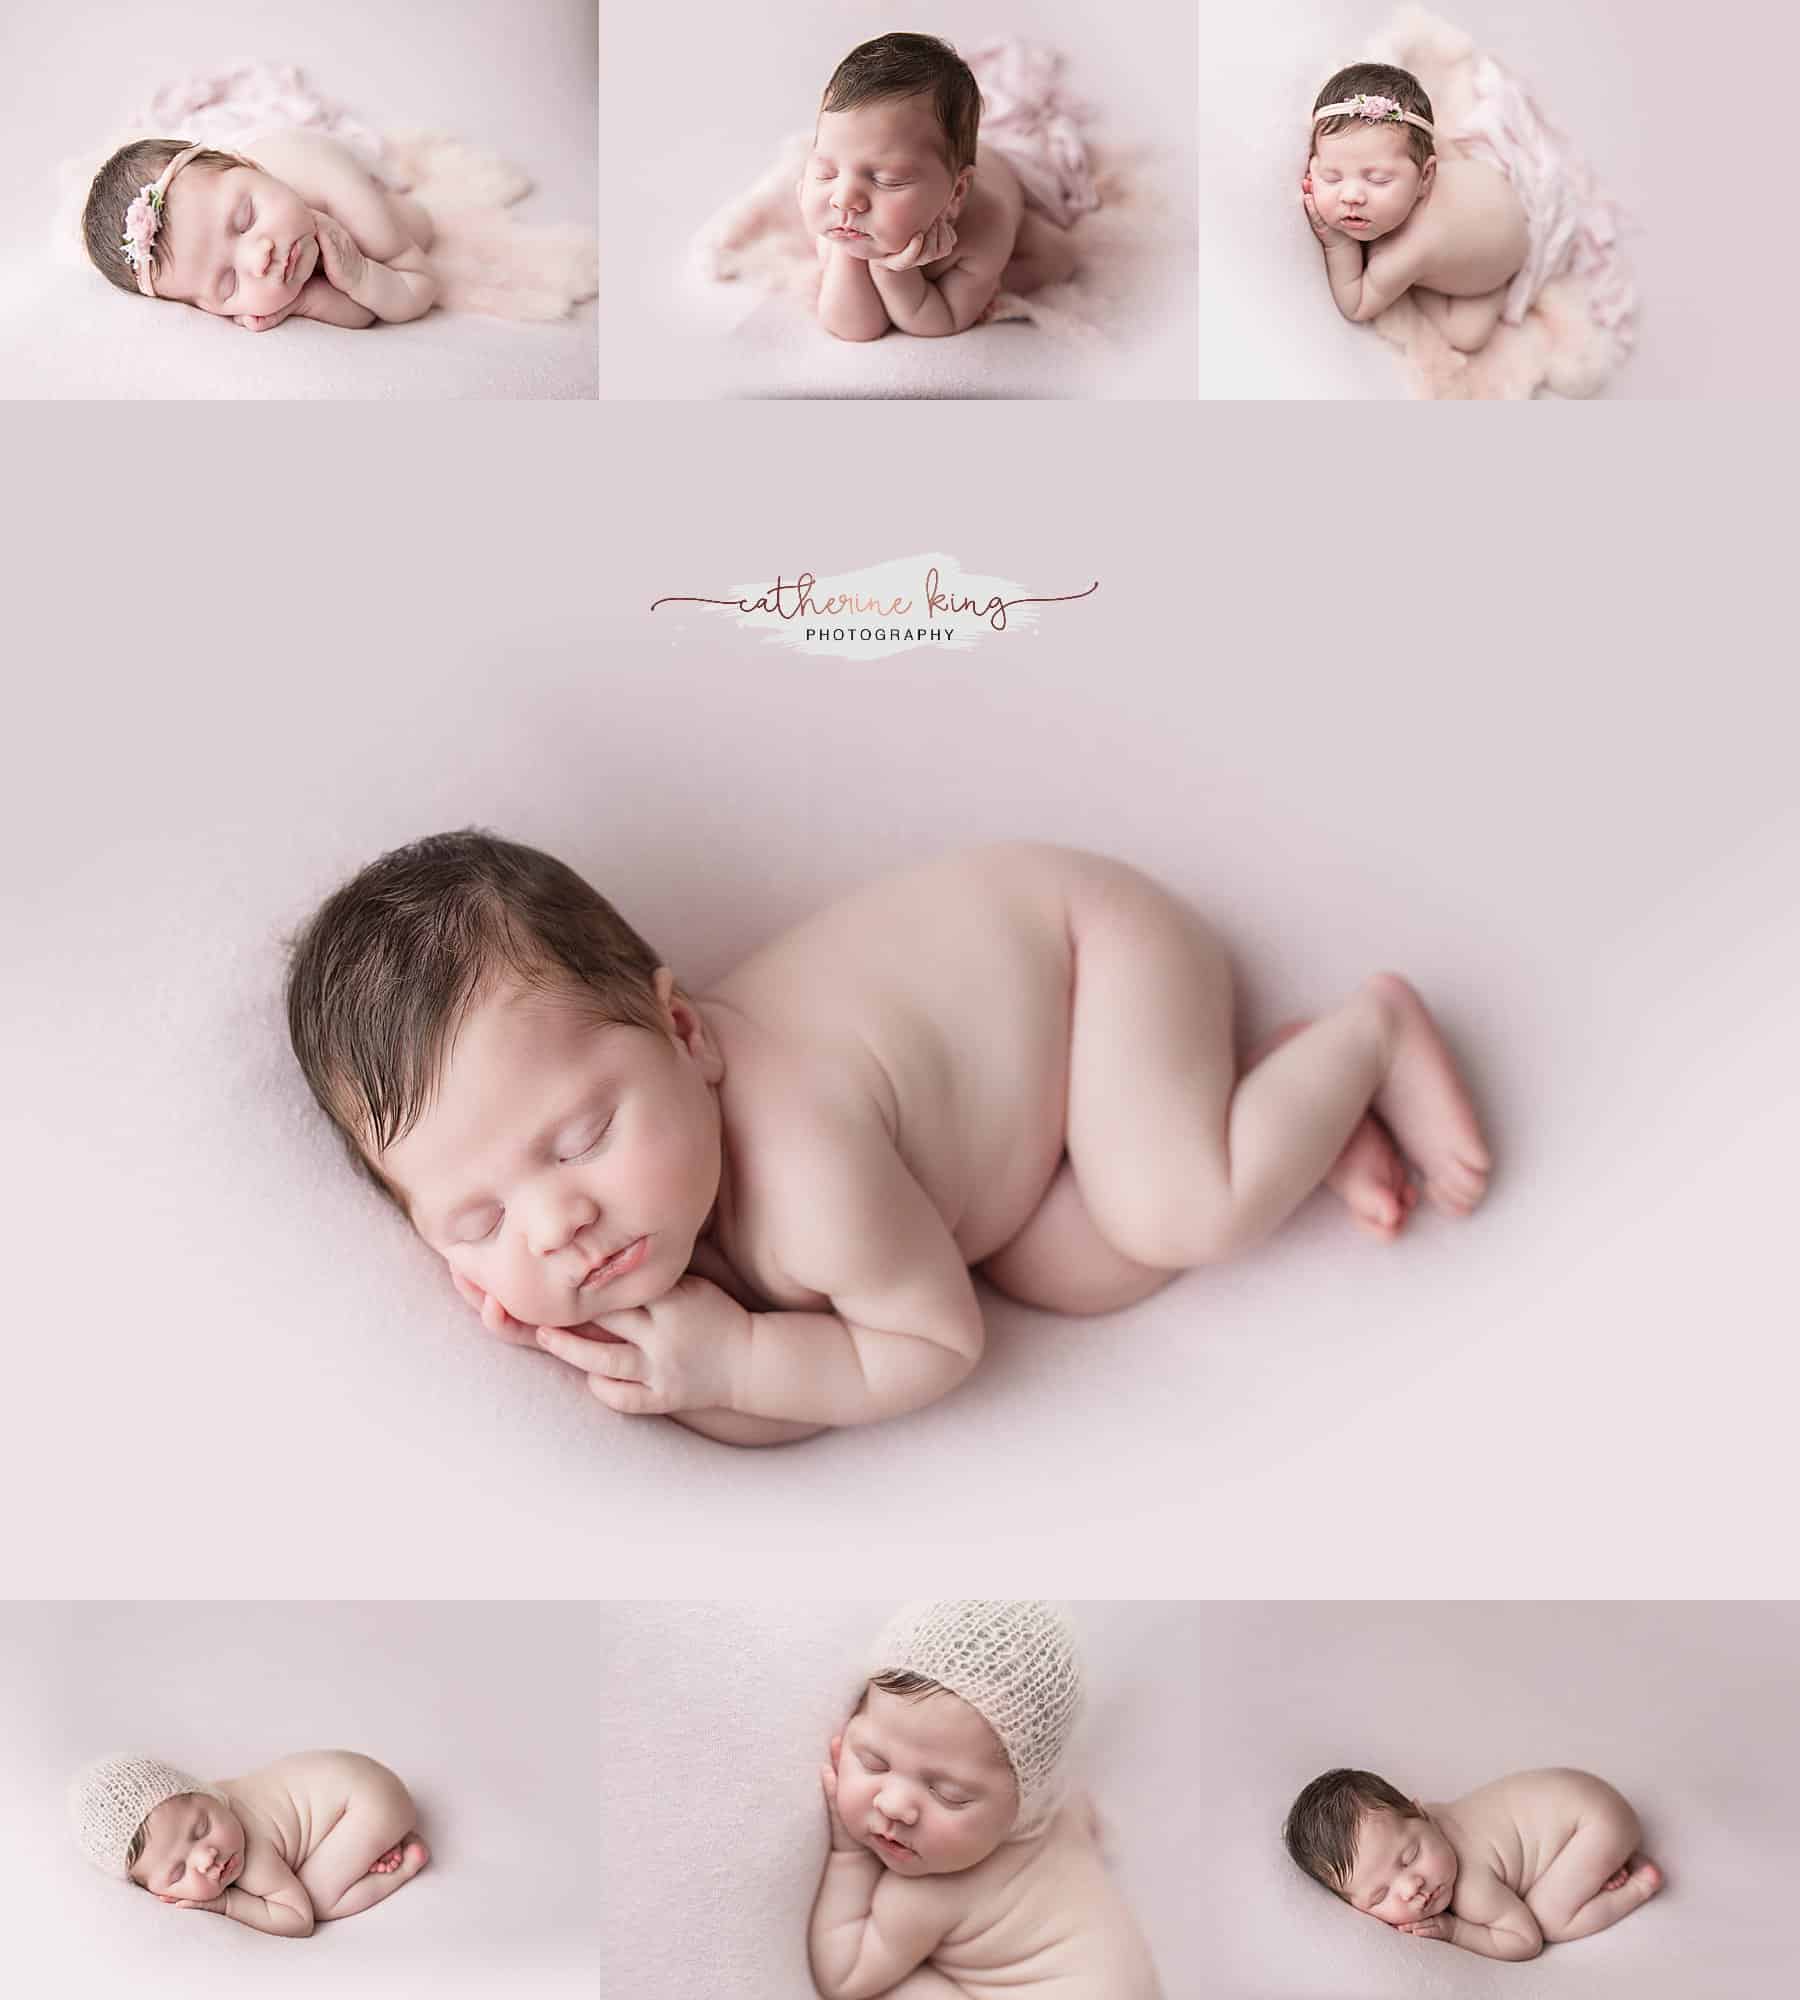 Indoor/outdoor newborn photography session with miss Emma